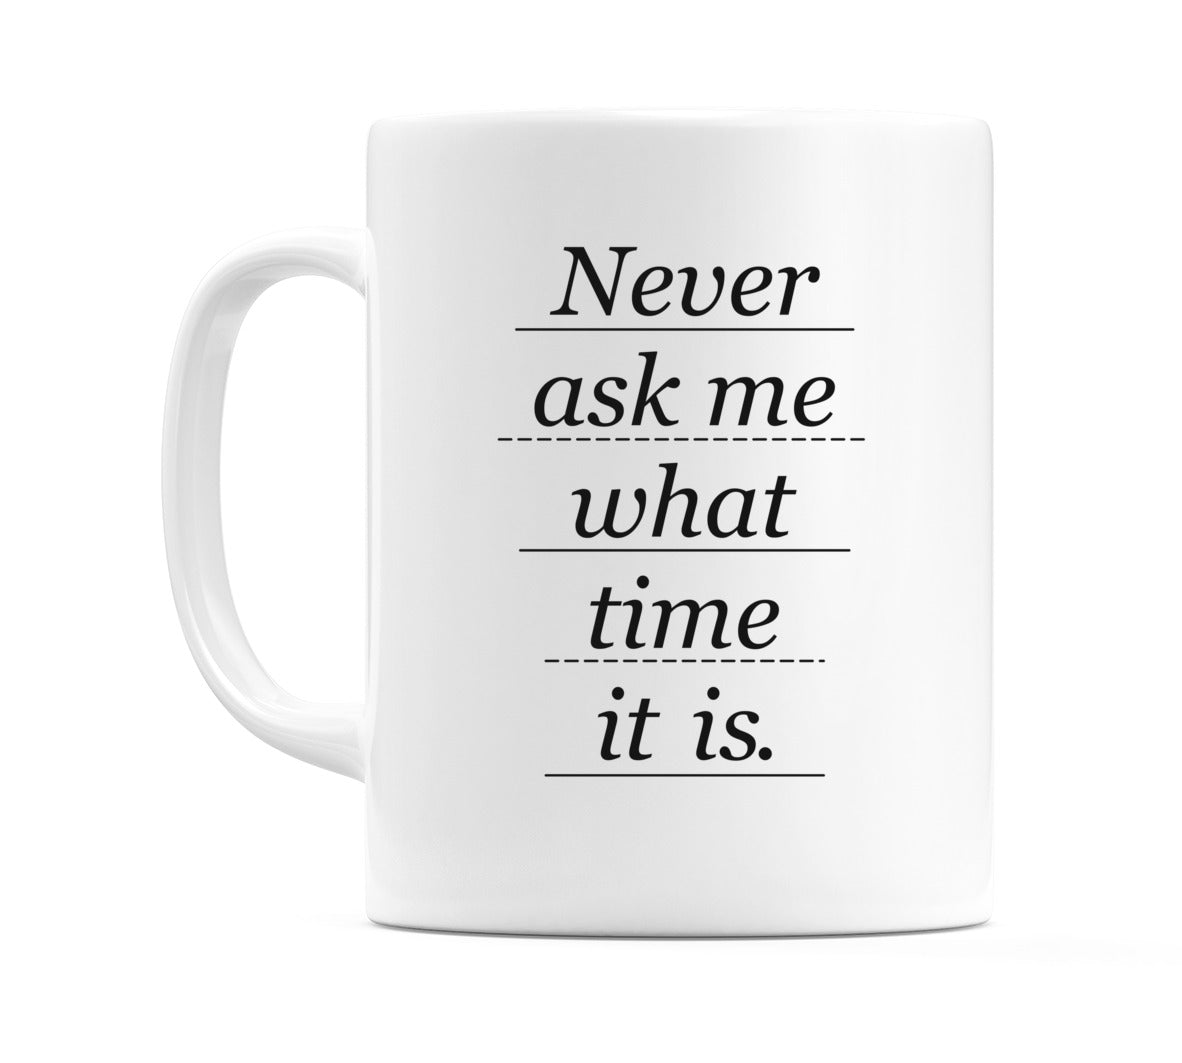 Never ask me what time it is. Mug